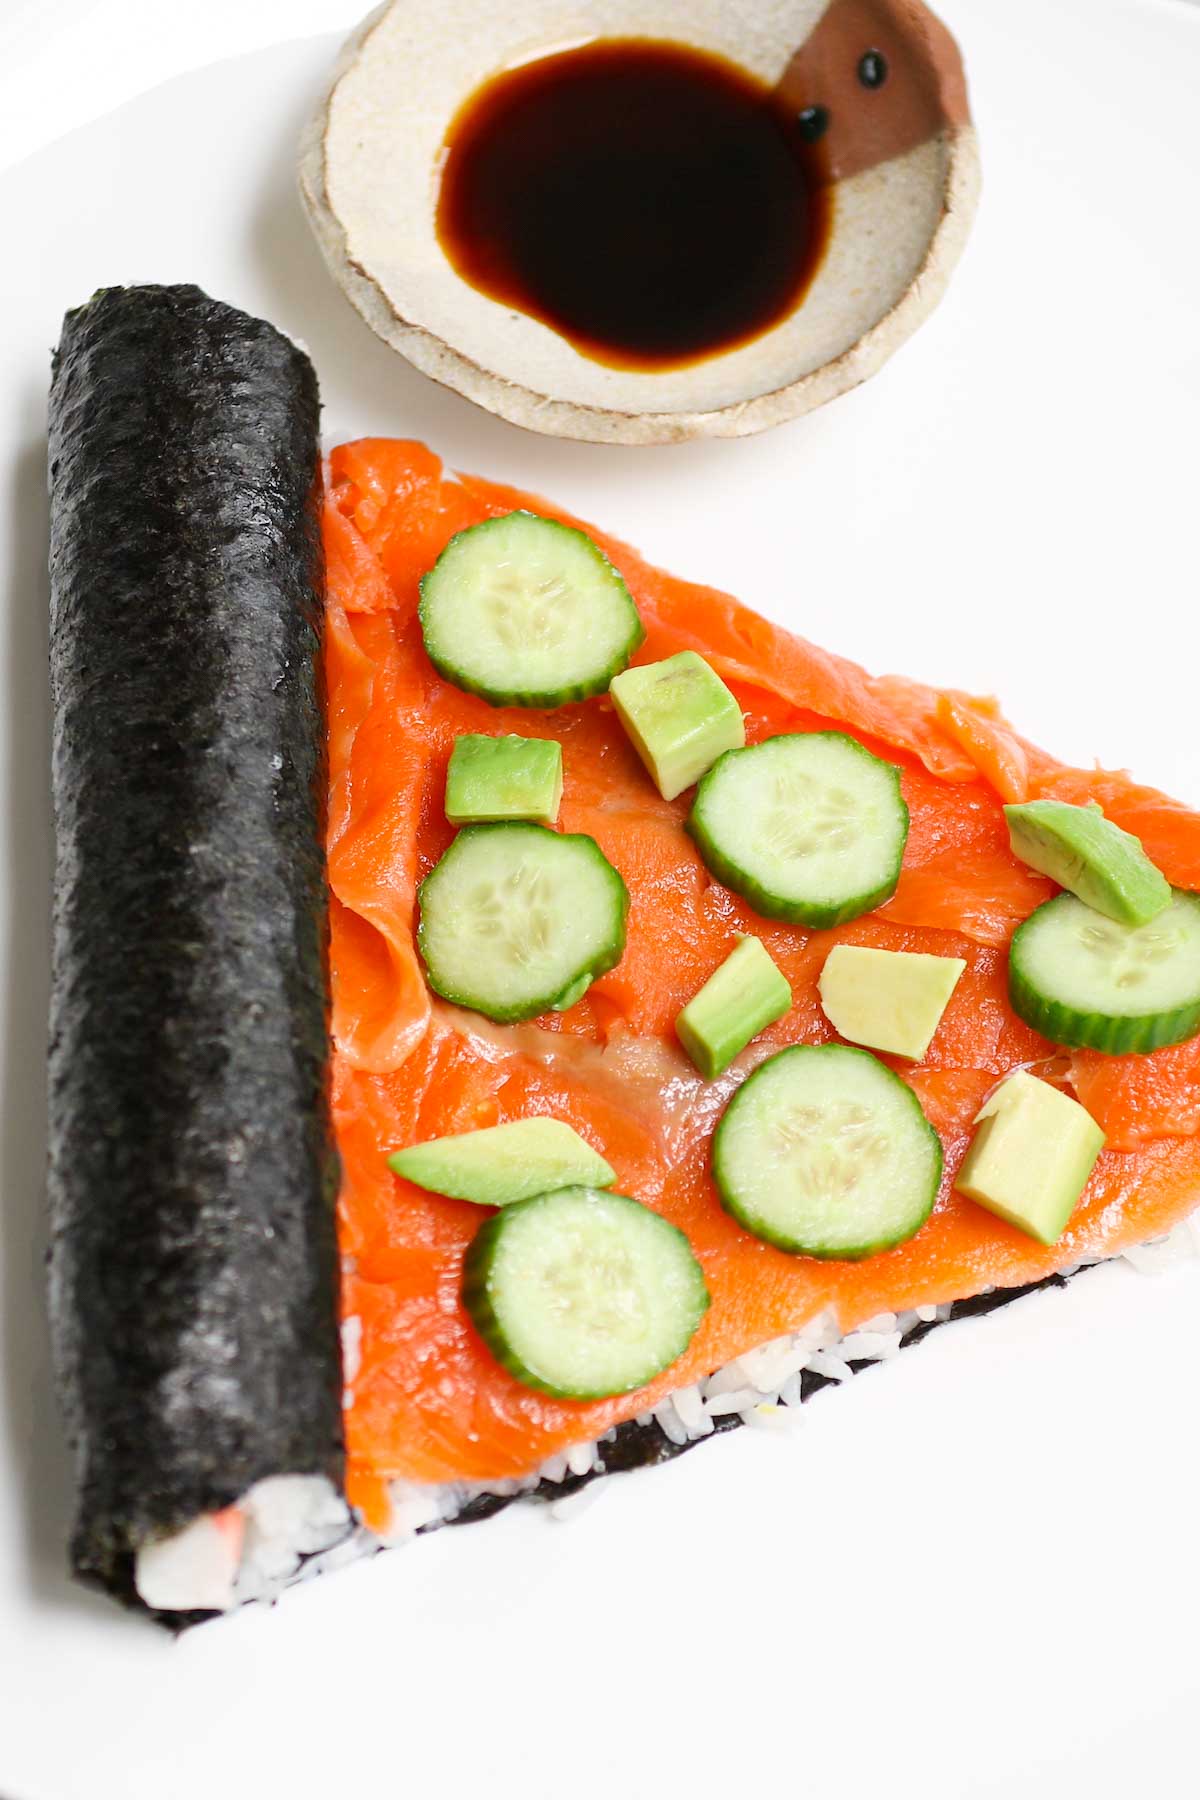 Here’s a way to shake up your pizza night...with Sushi Pizza! Imagine the convenience of a handheld slice of pizza with all of your favorite sushi flavors. This recipe makes a “crust” out of seaweed and rice that can be topped with all of your favorite sushi fixings like salmon, avocado, and cucumber.